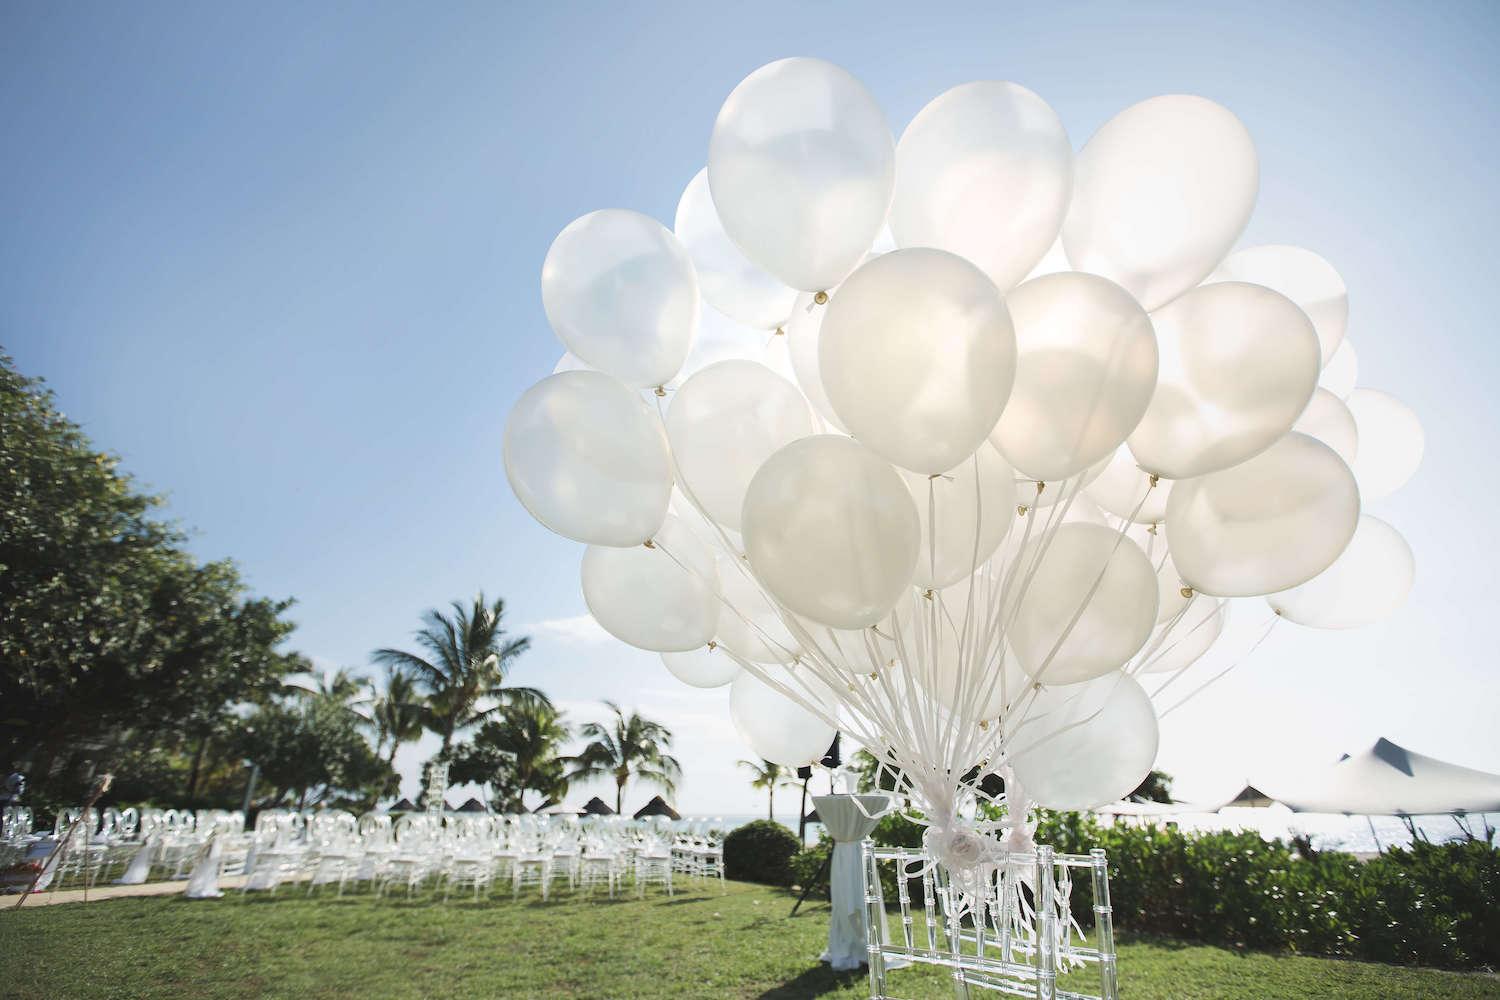 A large collection of white balloons in a field, perfect for parties and special occasions.